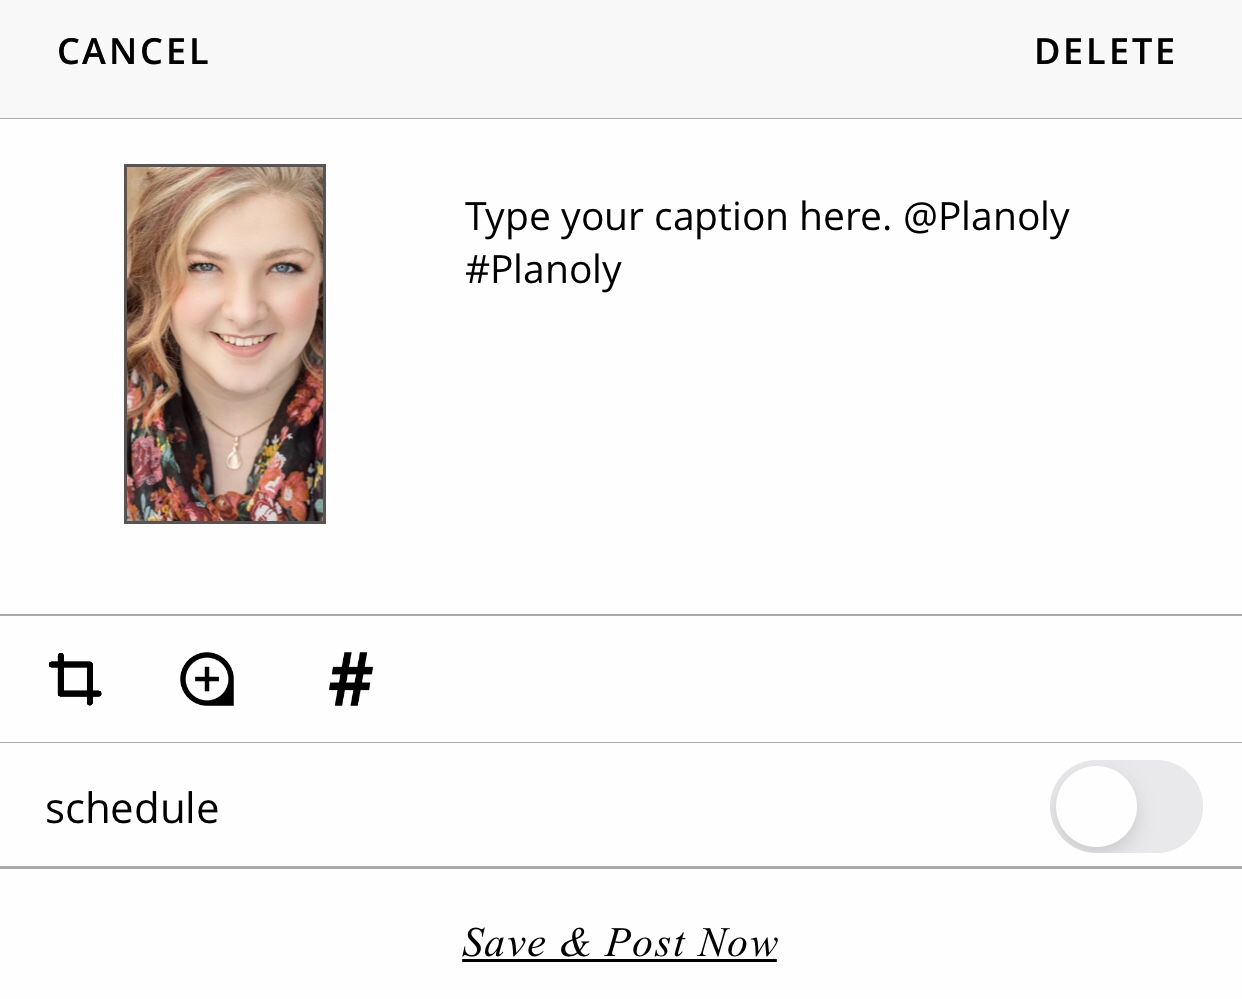 Get started with Planoly Plan your Captions www.iammichellegifford.com